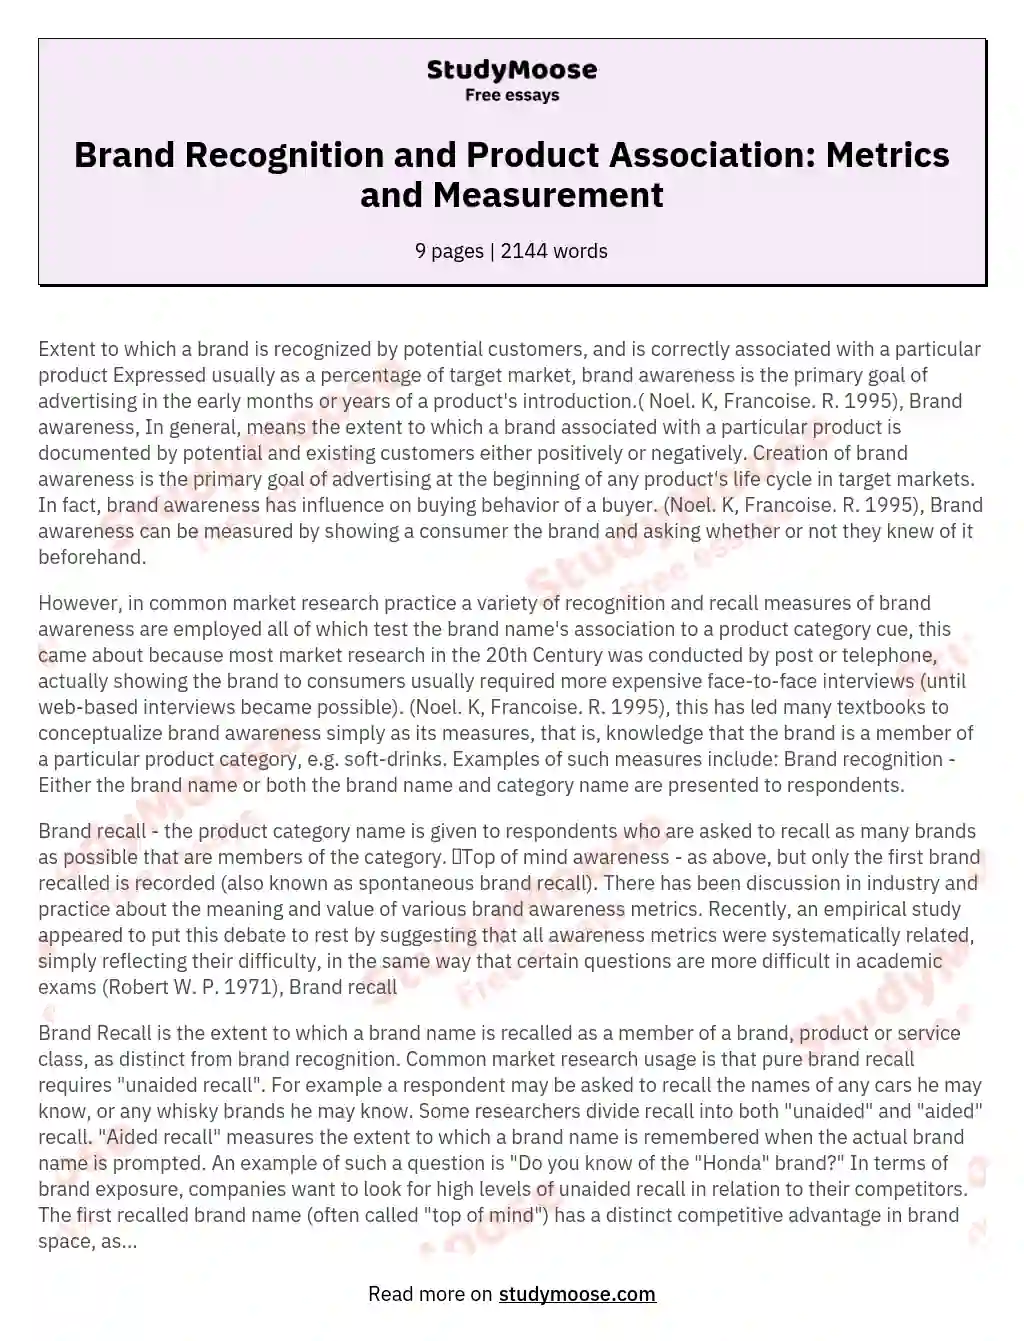 Brand Recognition and Product Association: Metrics and Measurement essay